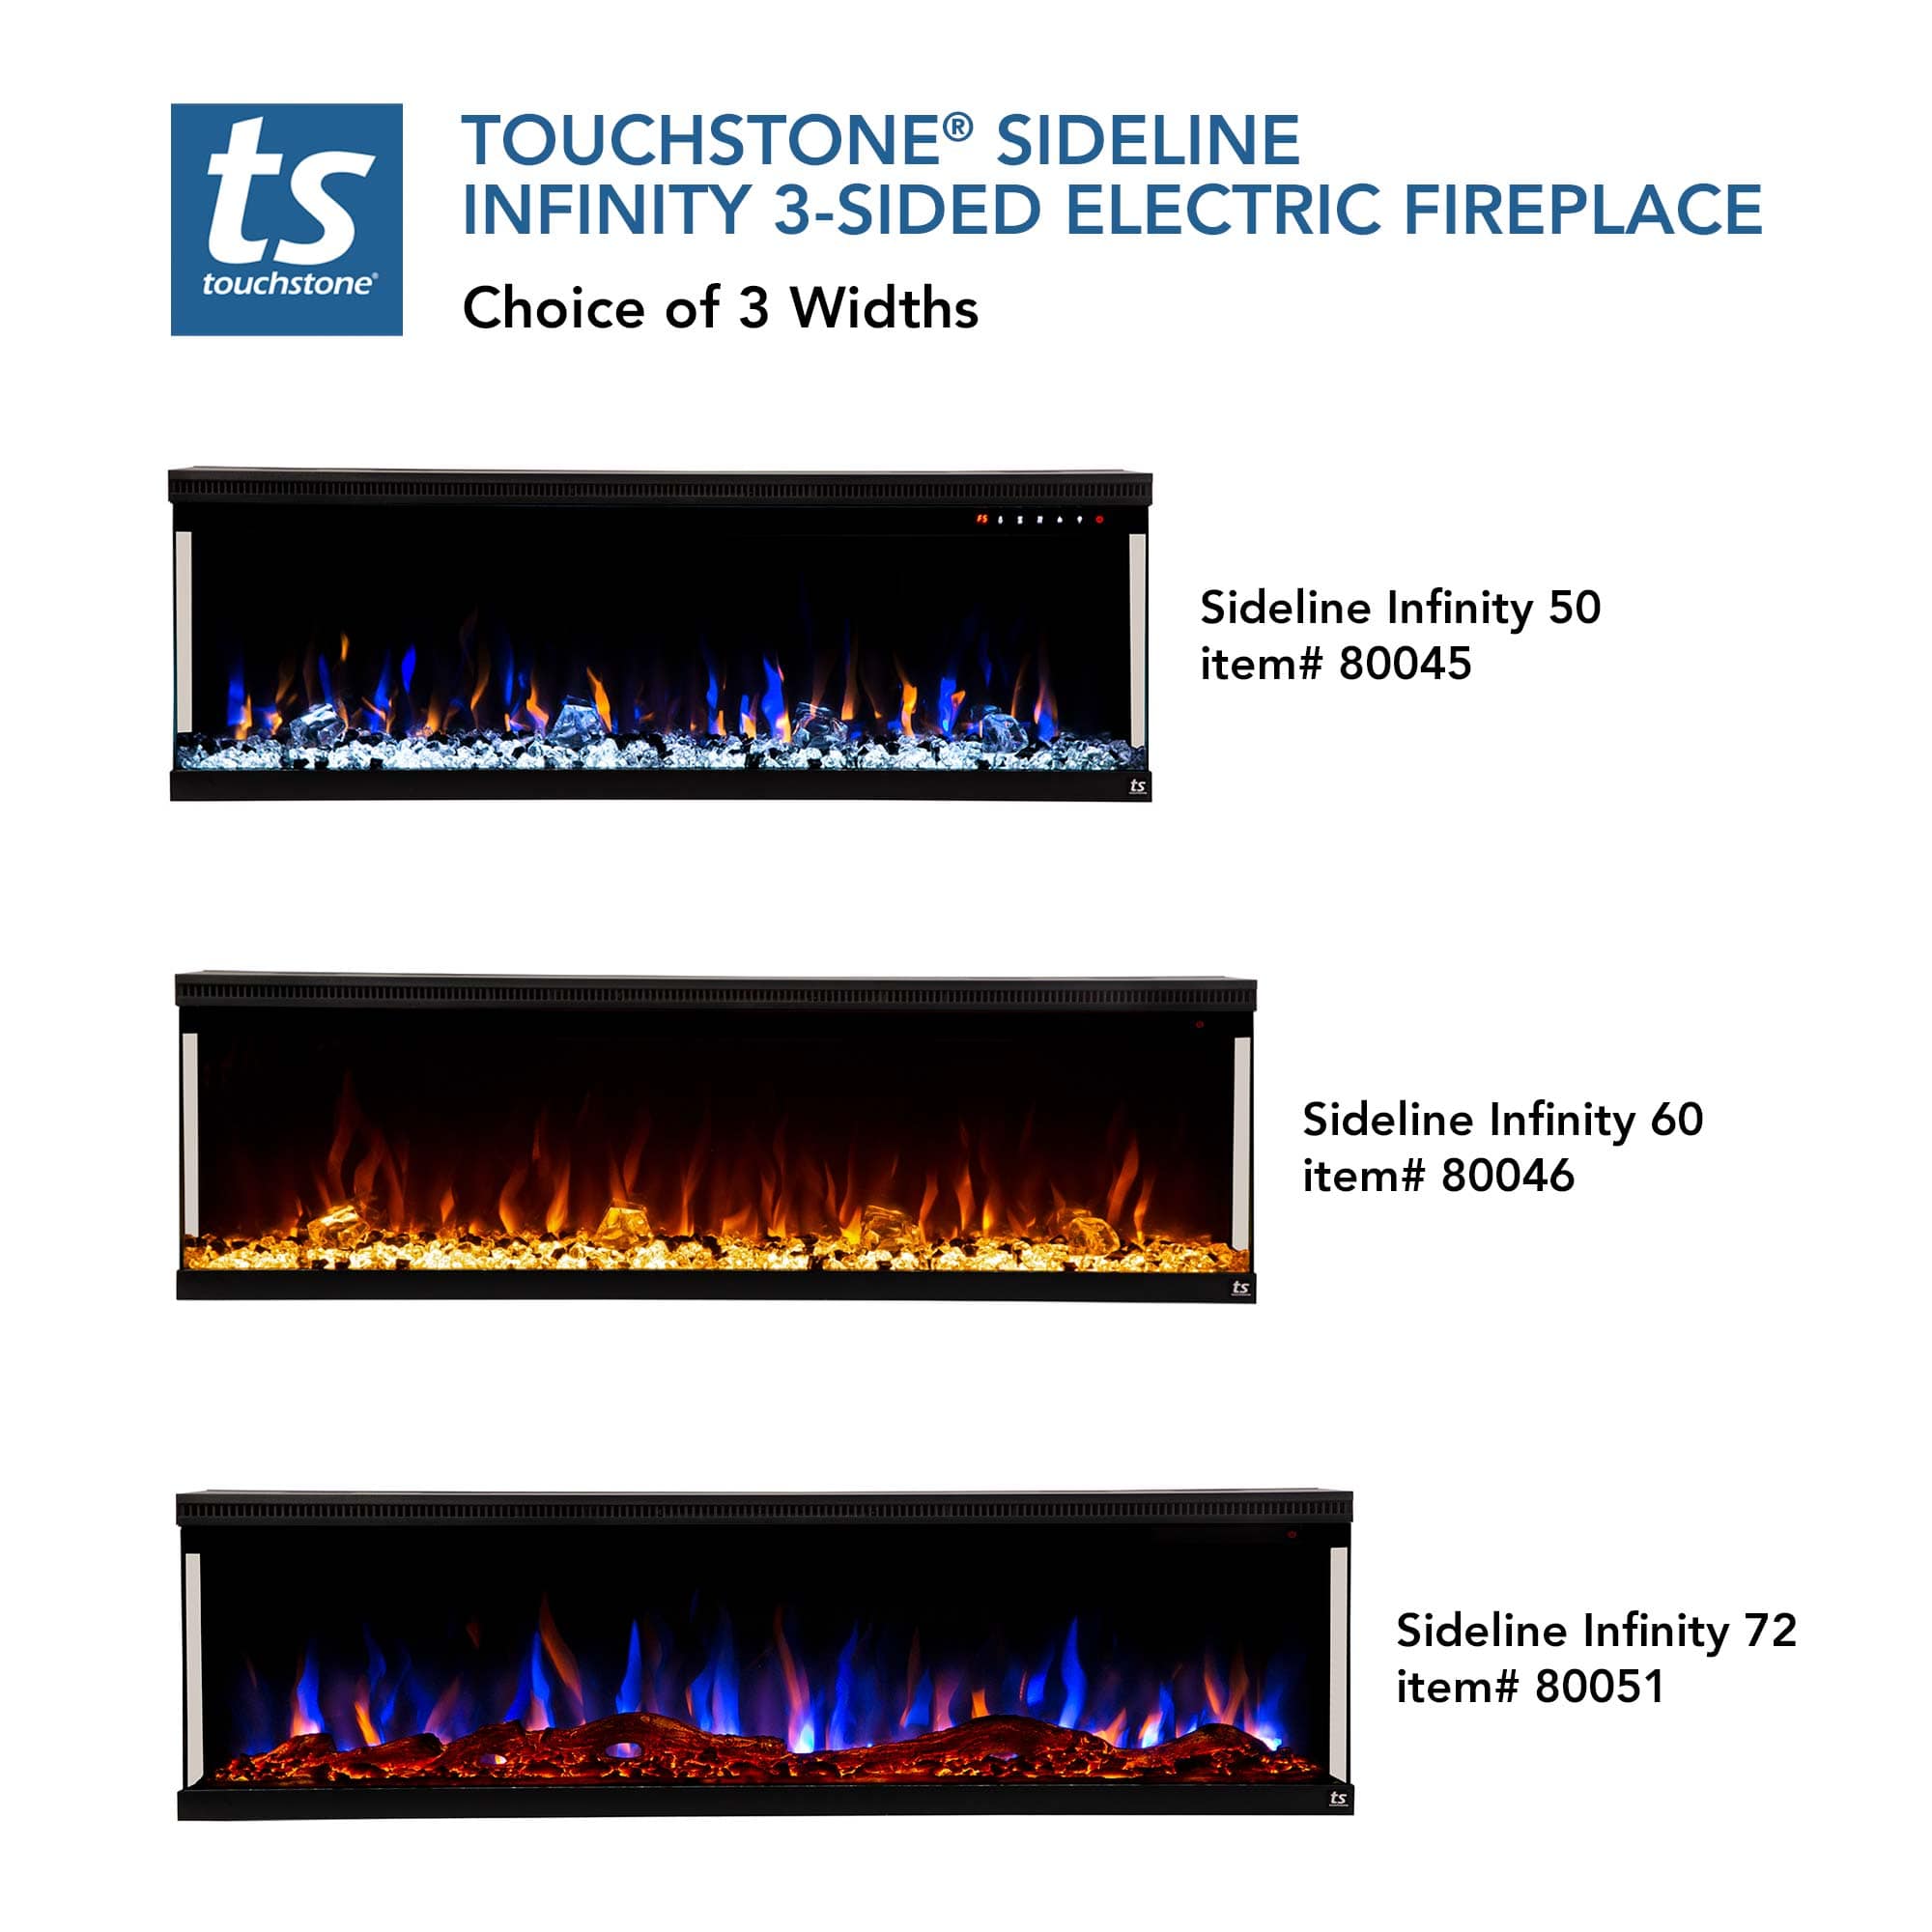 The Touchstone Sideline Infinity 3 Sided Electric Fireplace shown in the three available widths